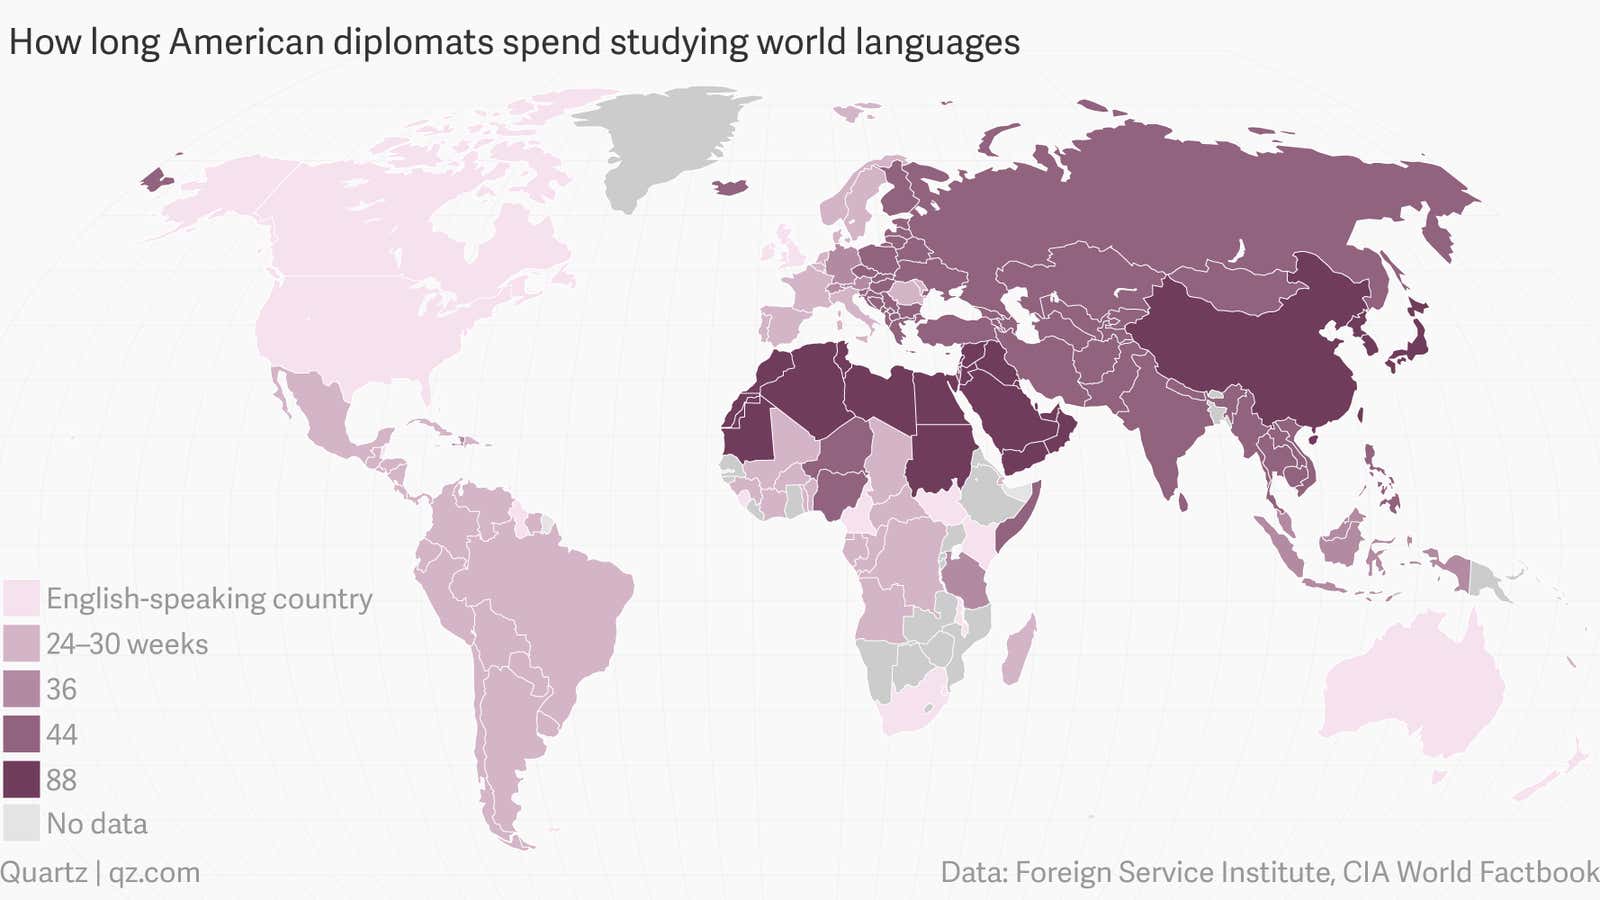 The languages that take the most (and least) time to learn, per the US Foreign Service